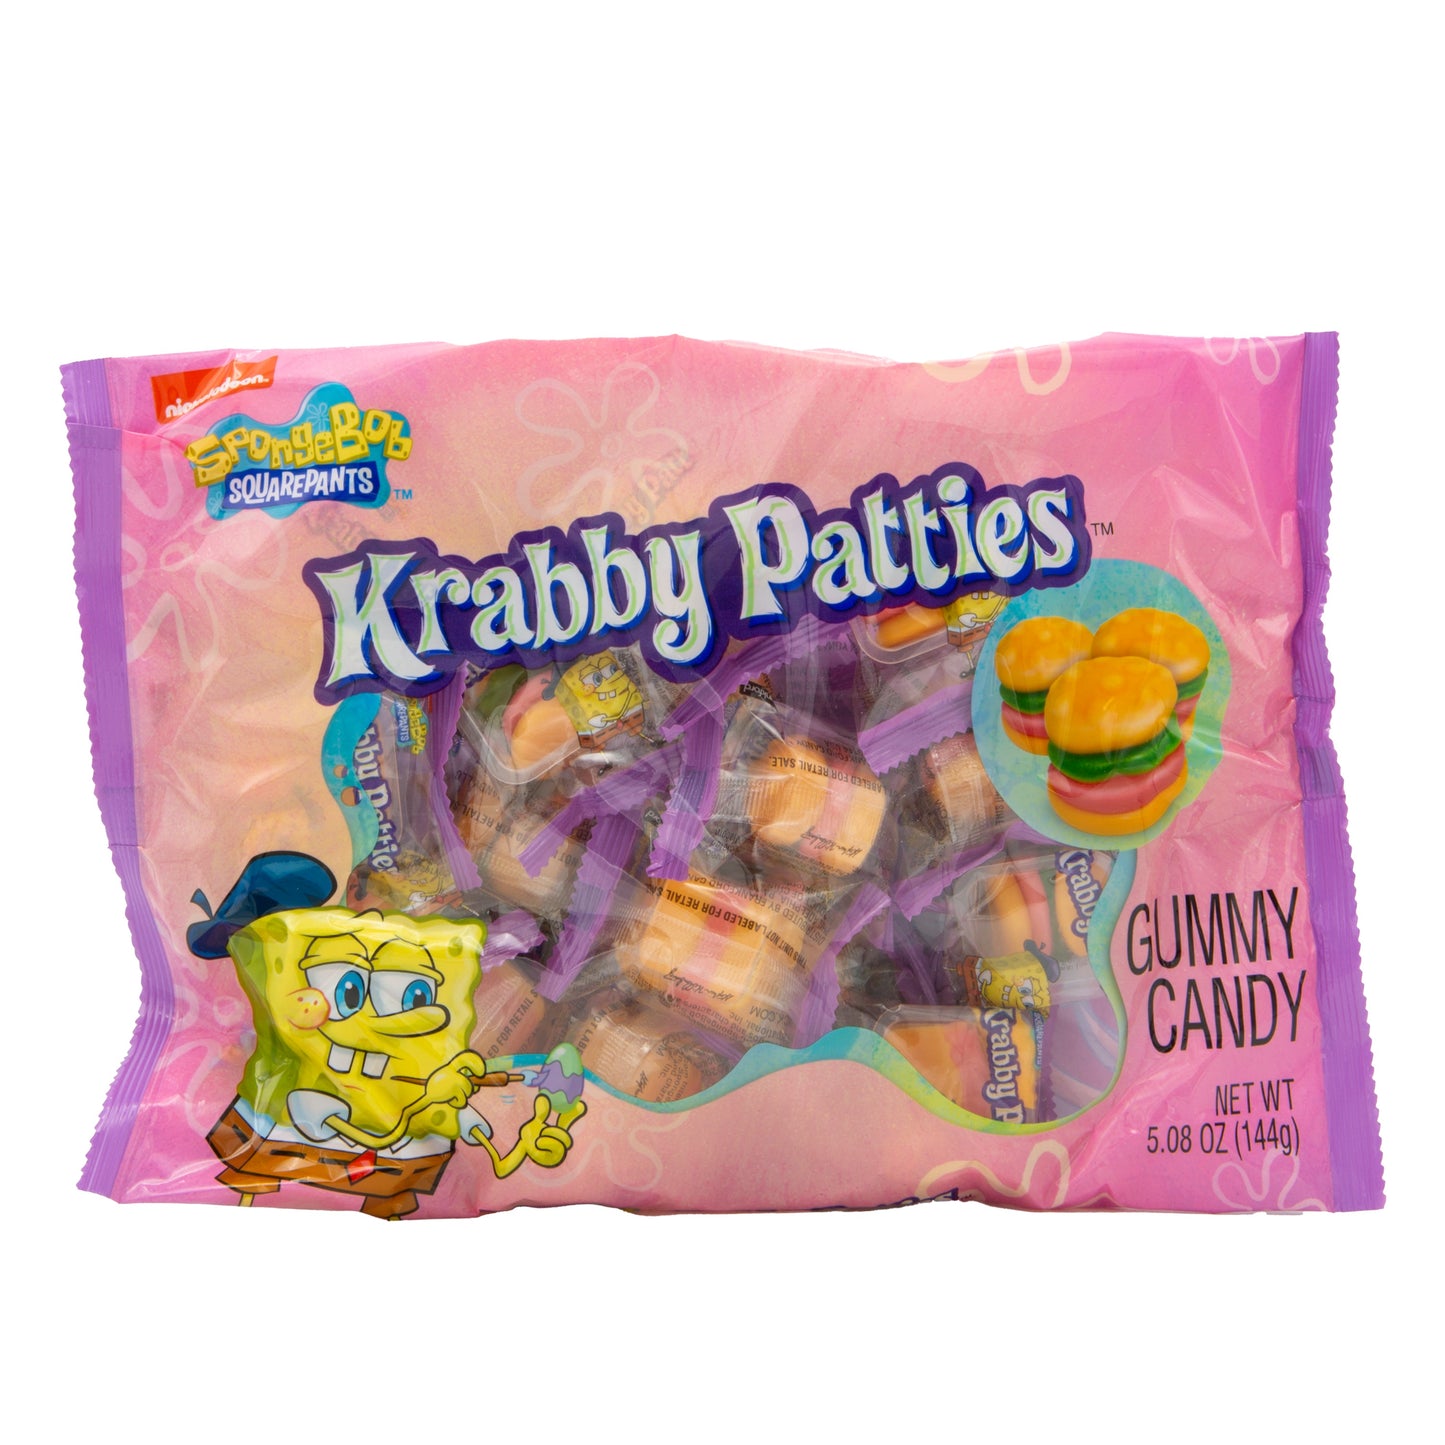 Pink Easter themed bag with individually wrapped krabby patties burgers gummies